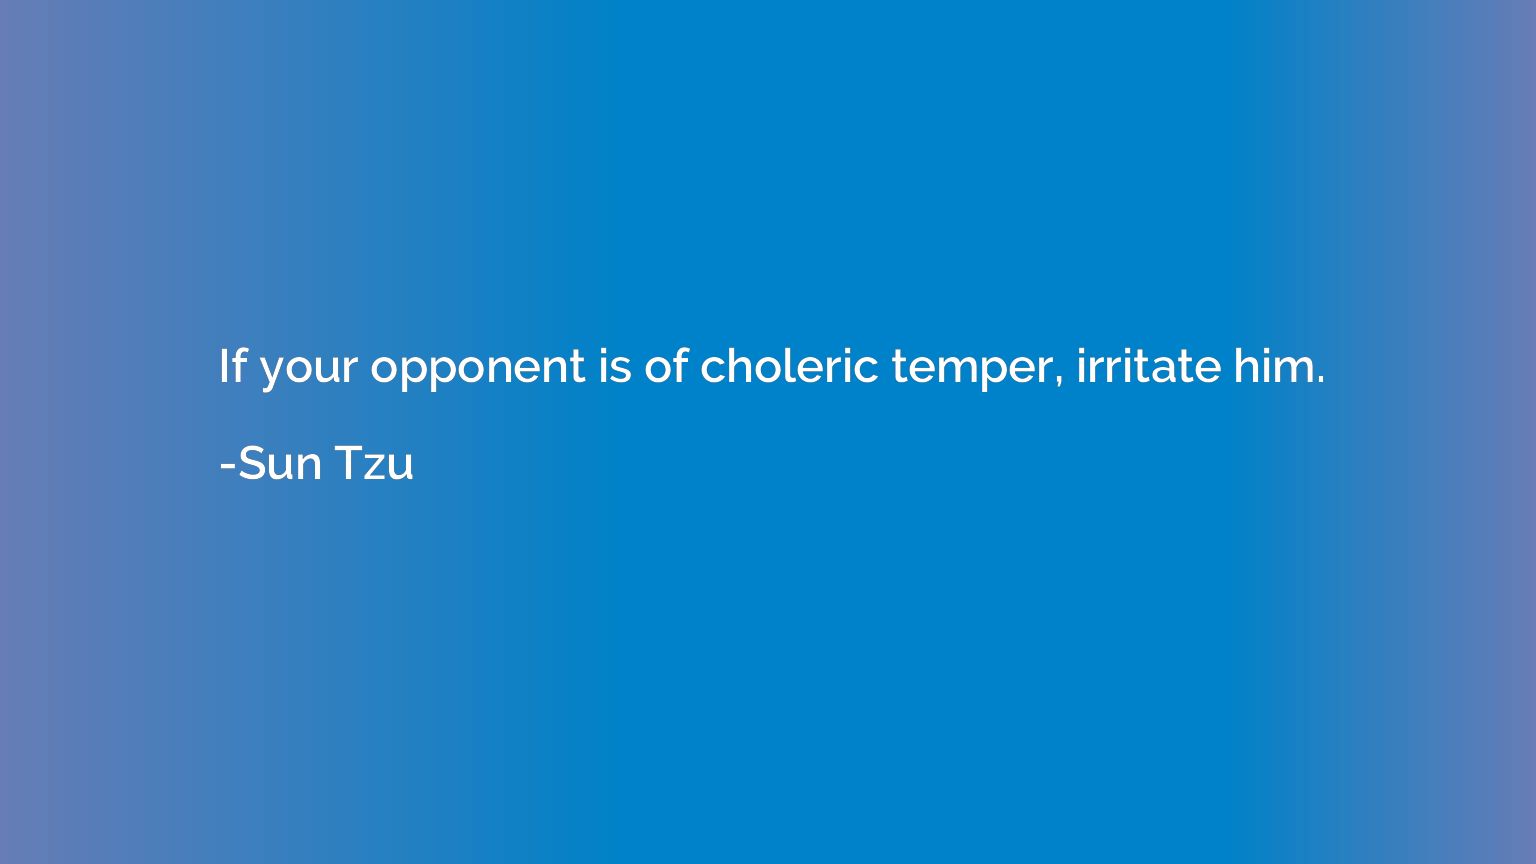 If your opponent is of choleric temper, irritate him.